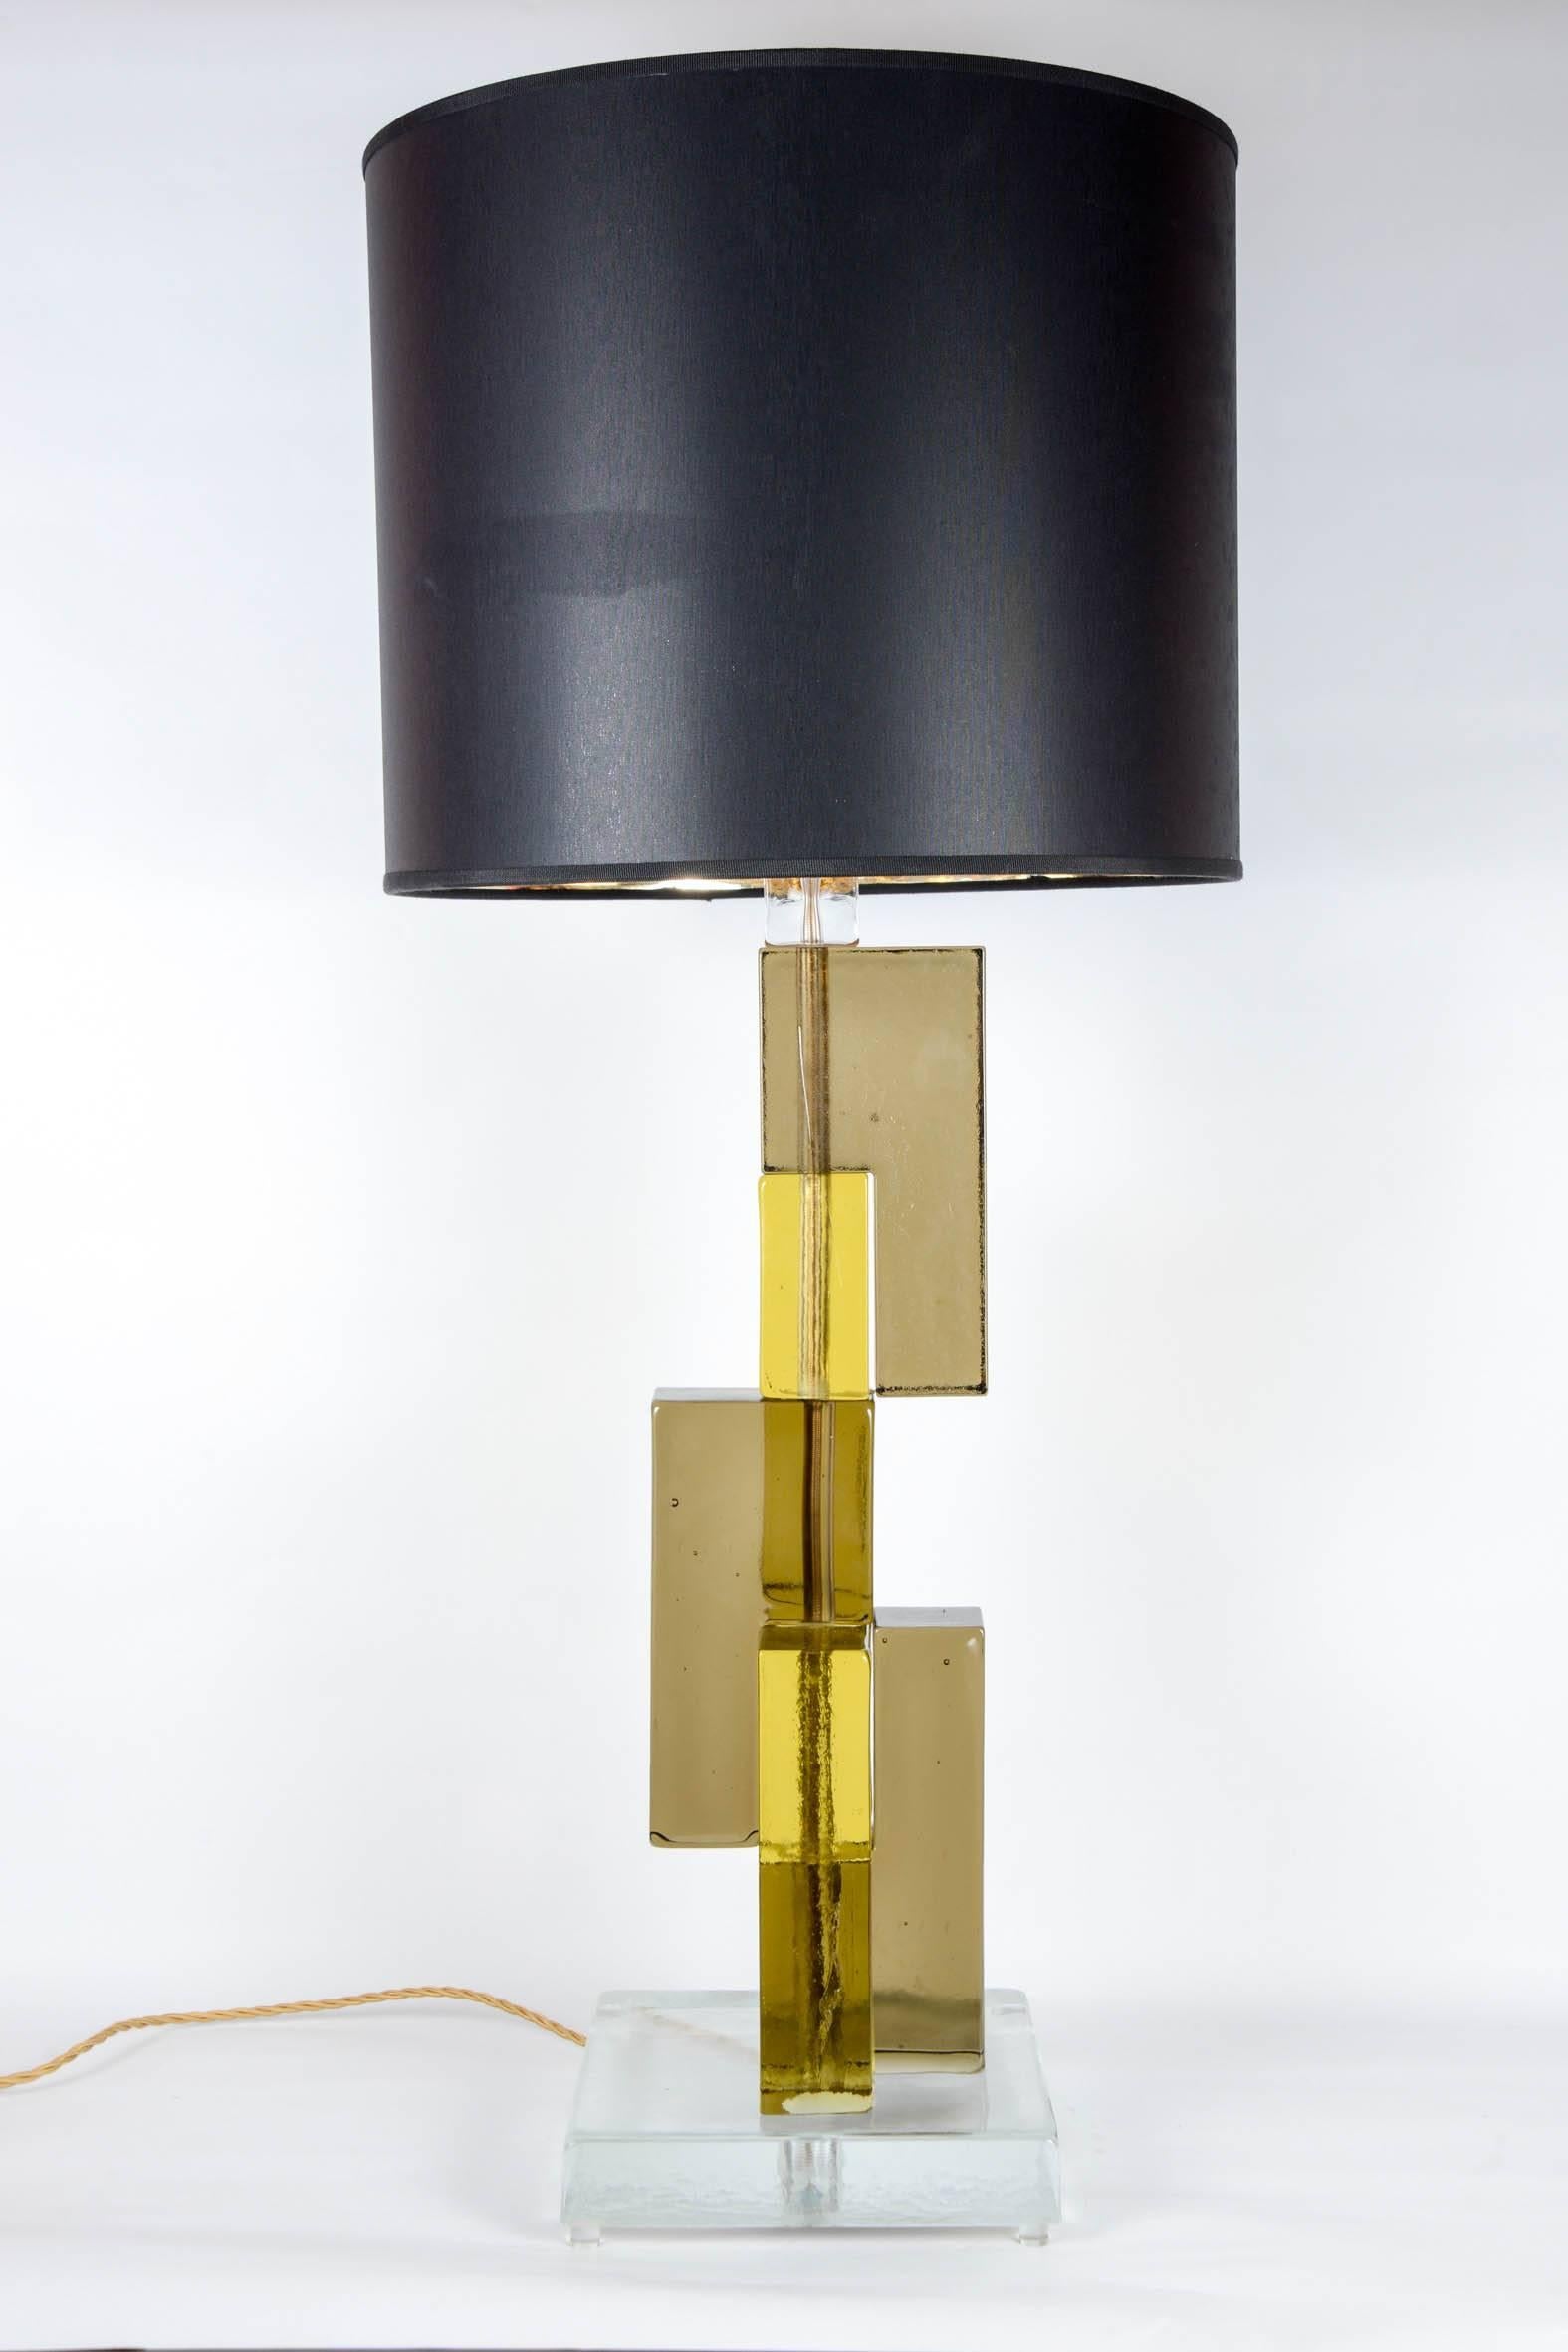 Nice sculptural table lamps
Dimensions given without shade
No shade provided.